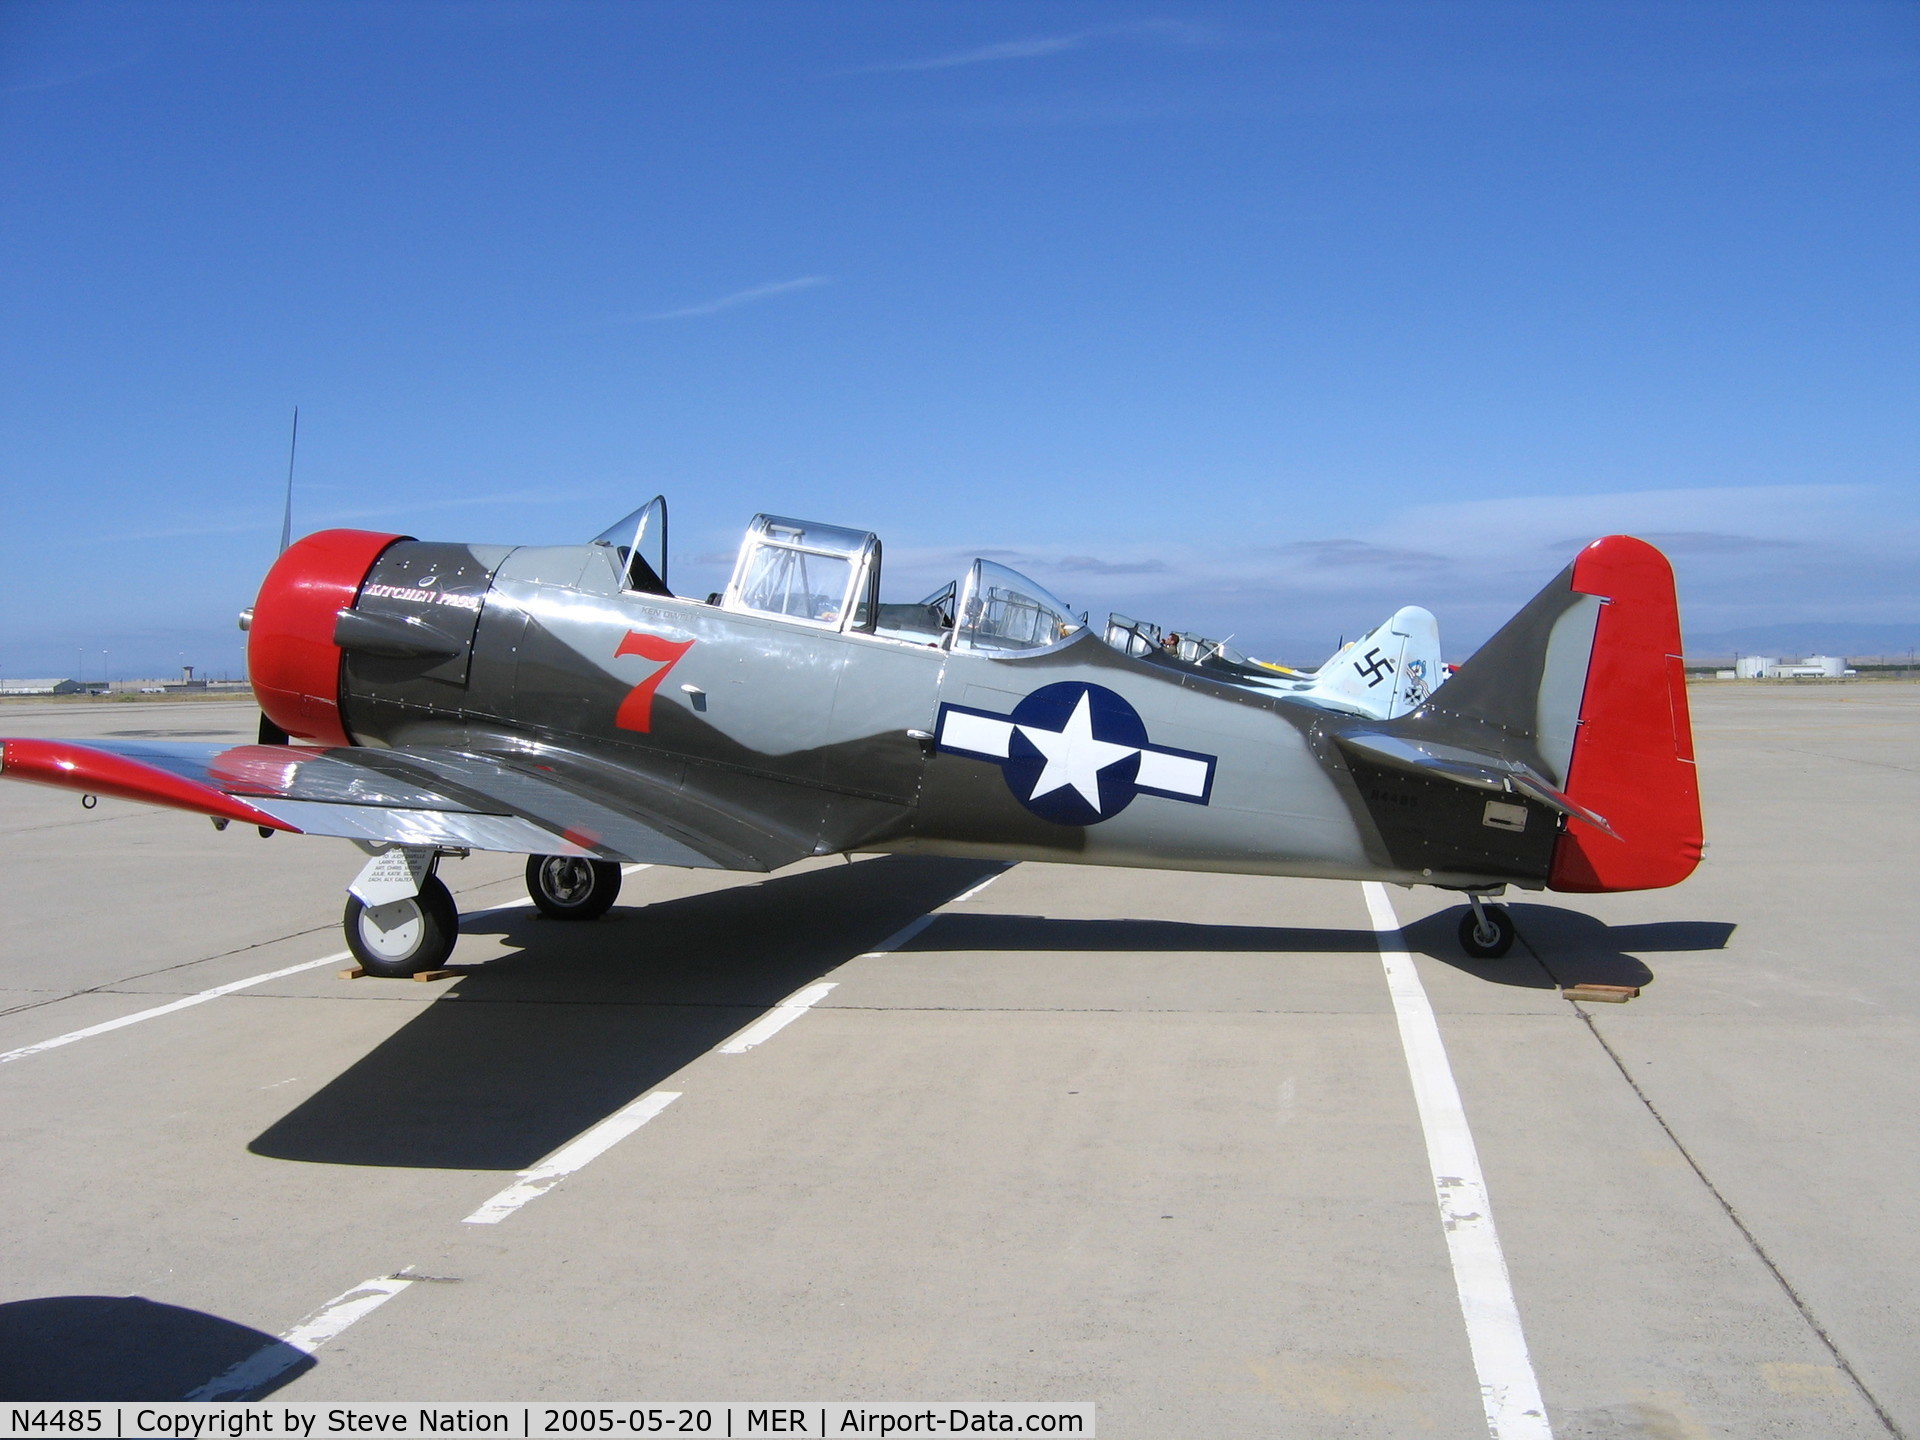 N4485, 1944 North American AT-6F Texan C/N 121-42368, Ken Dwelle's SNJ-6 in colorful USAAF camo as #7 